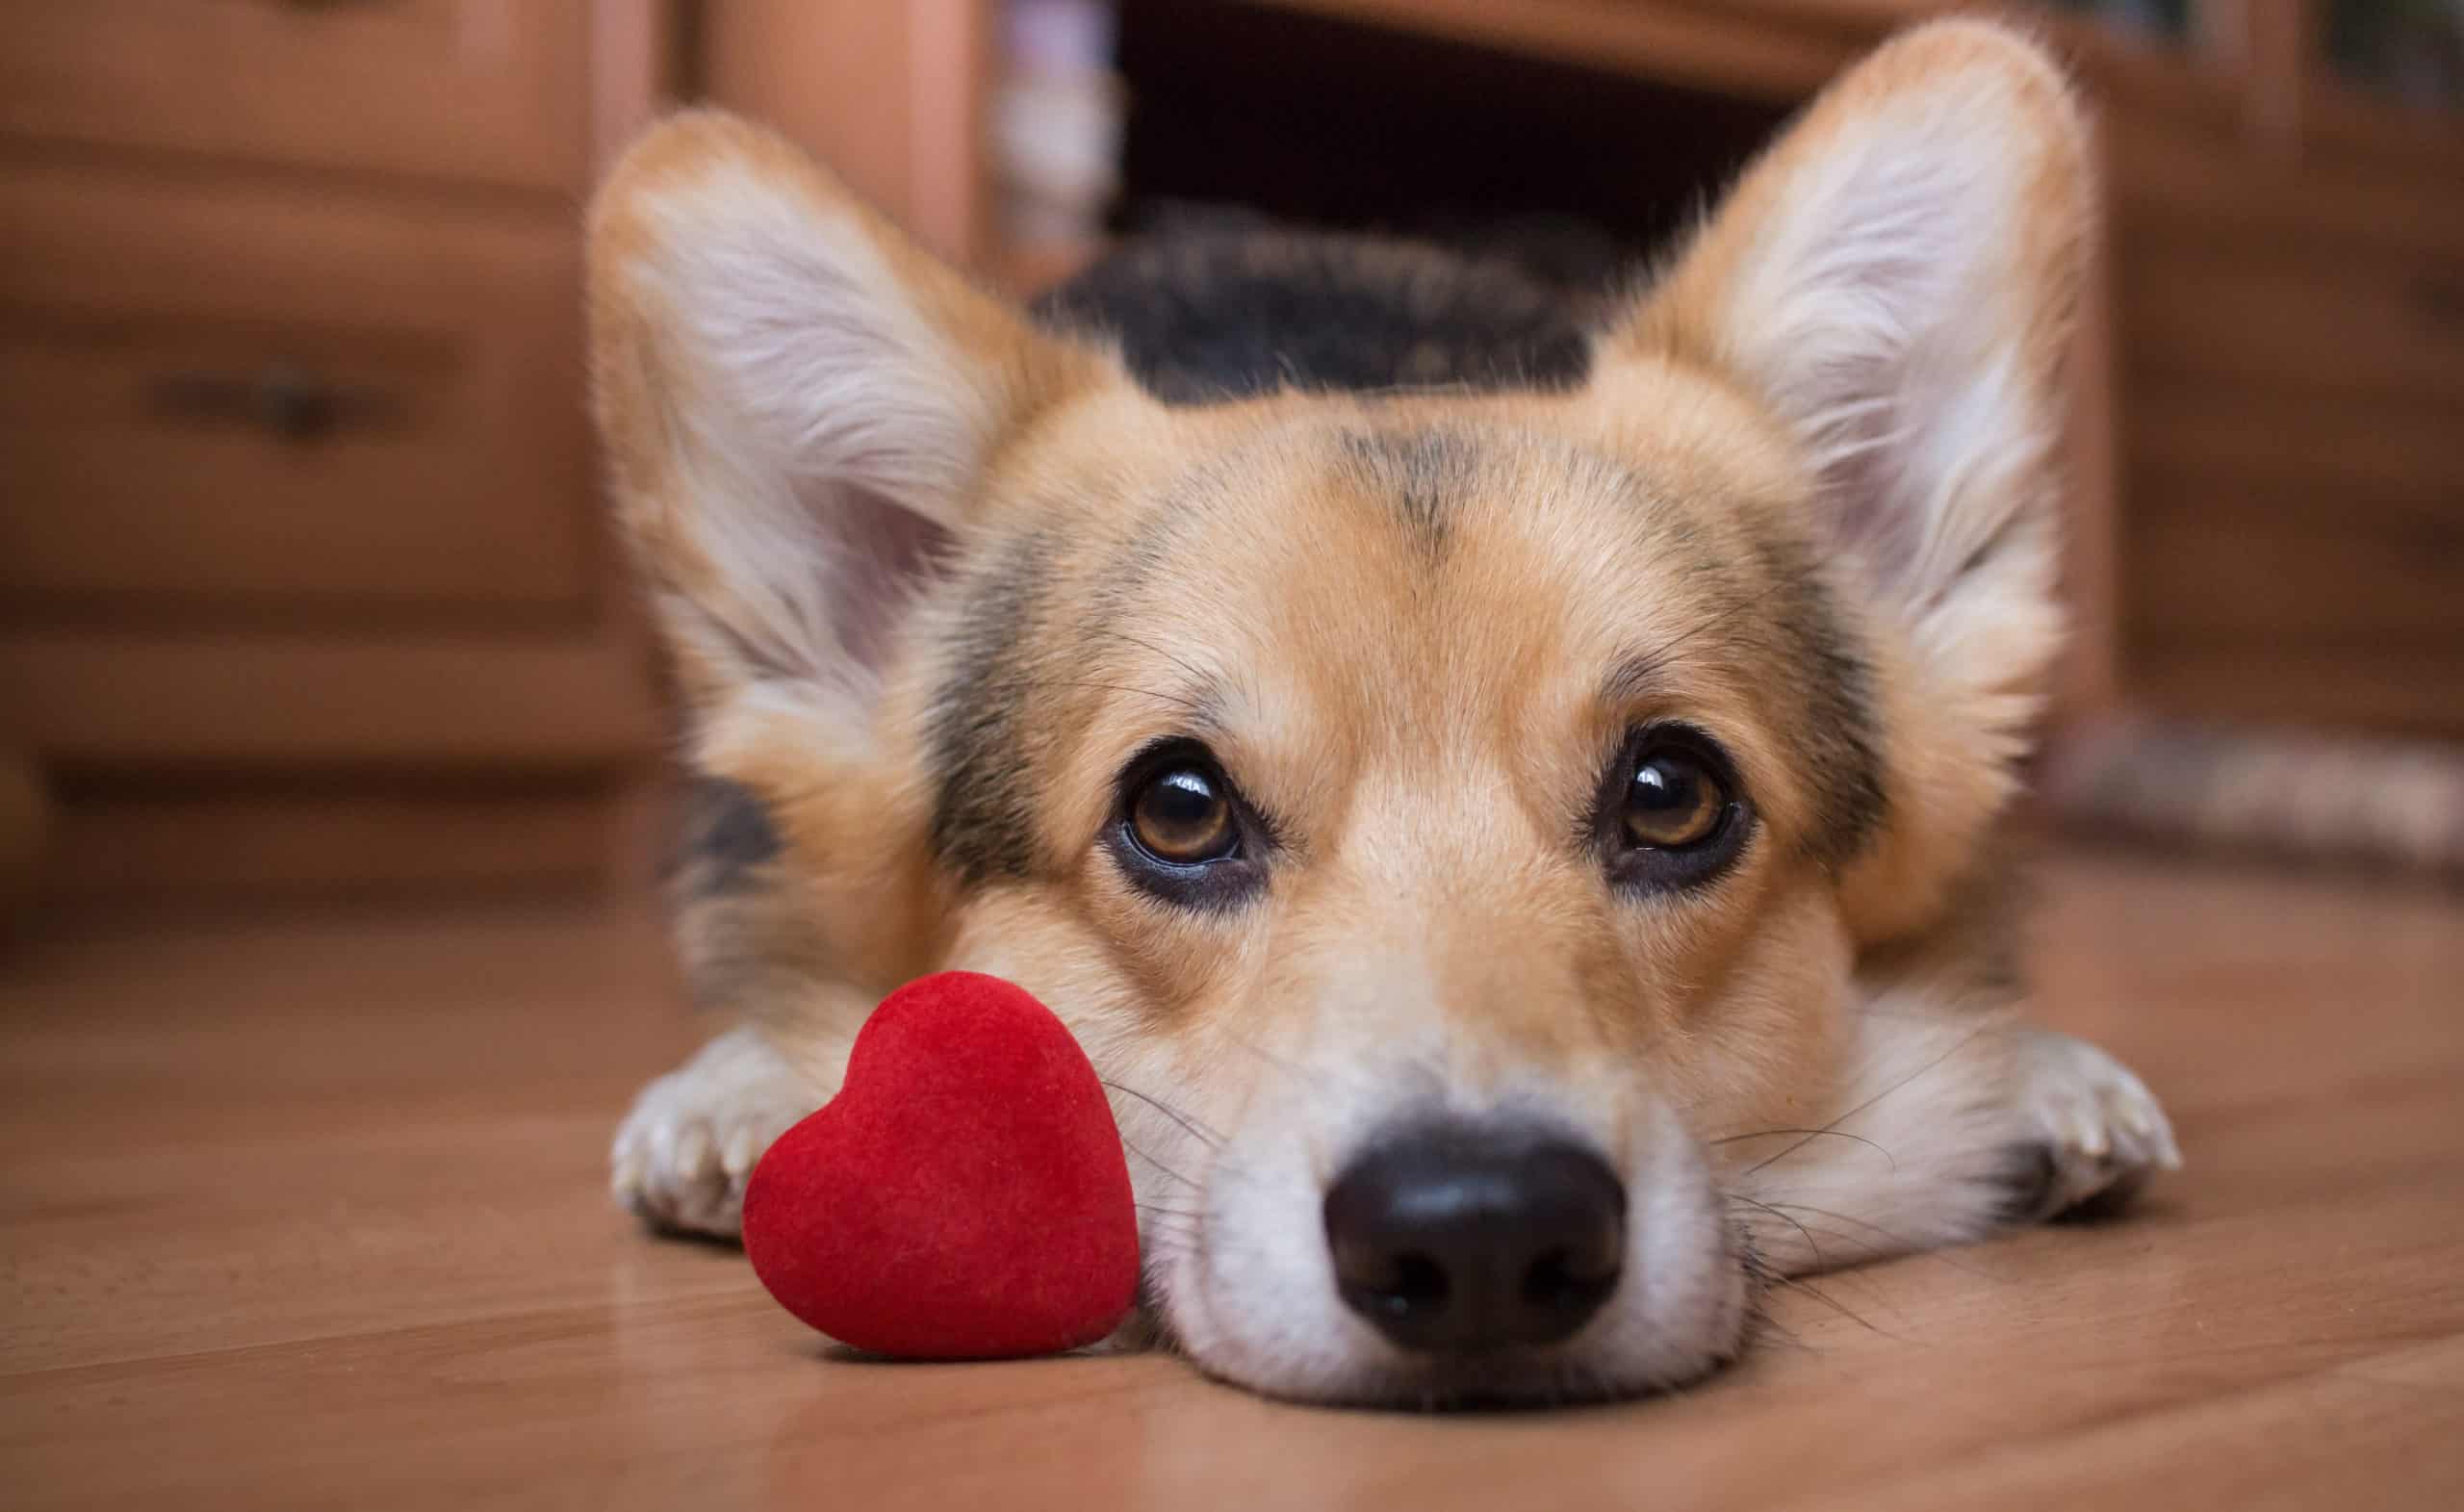 How to tell if your dog is sad